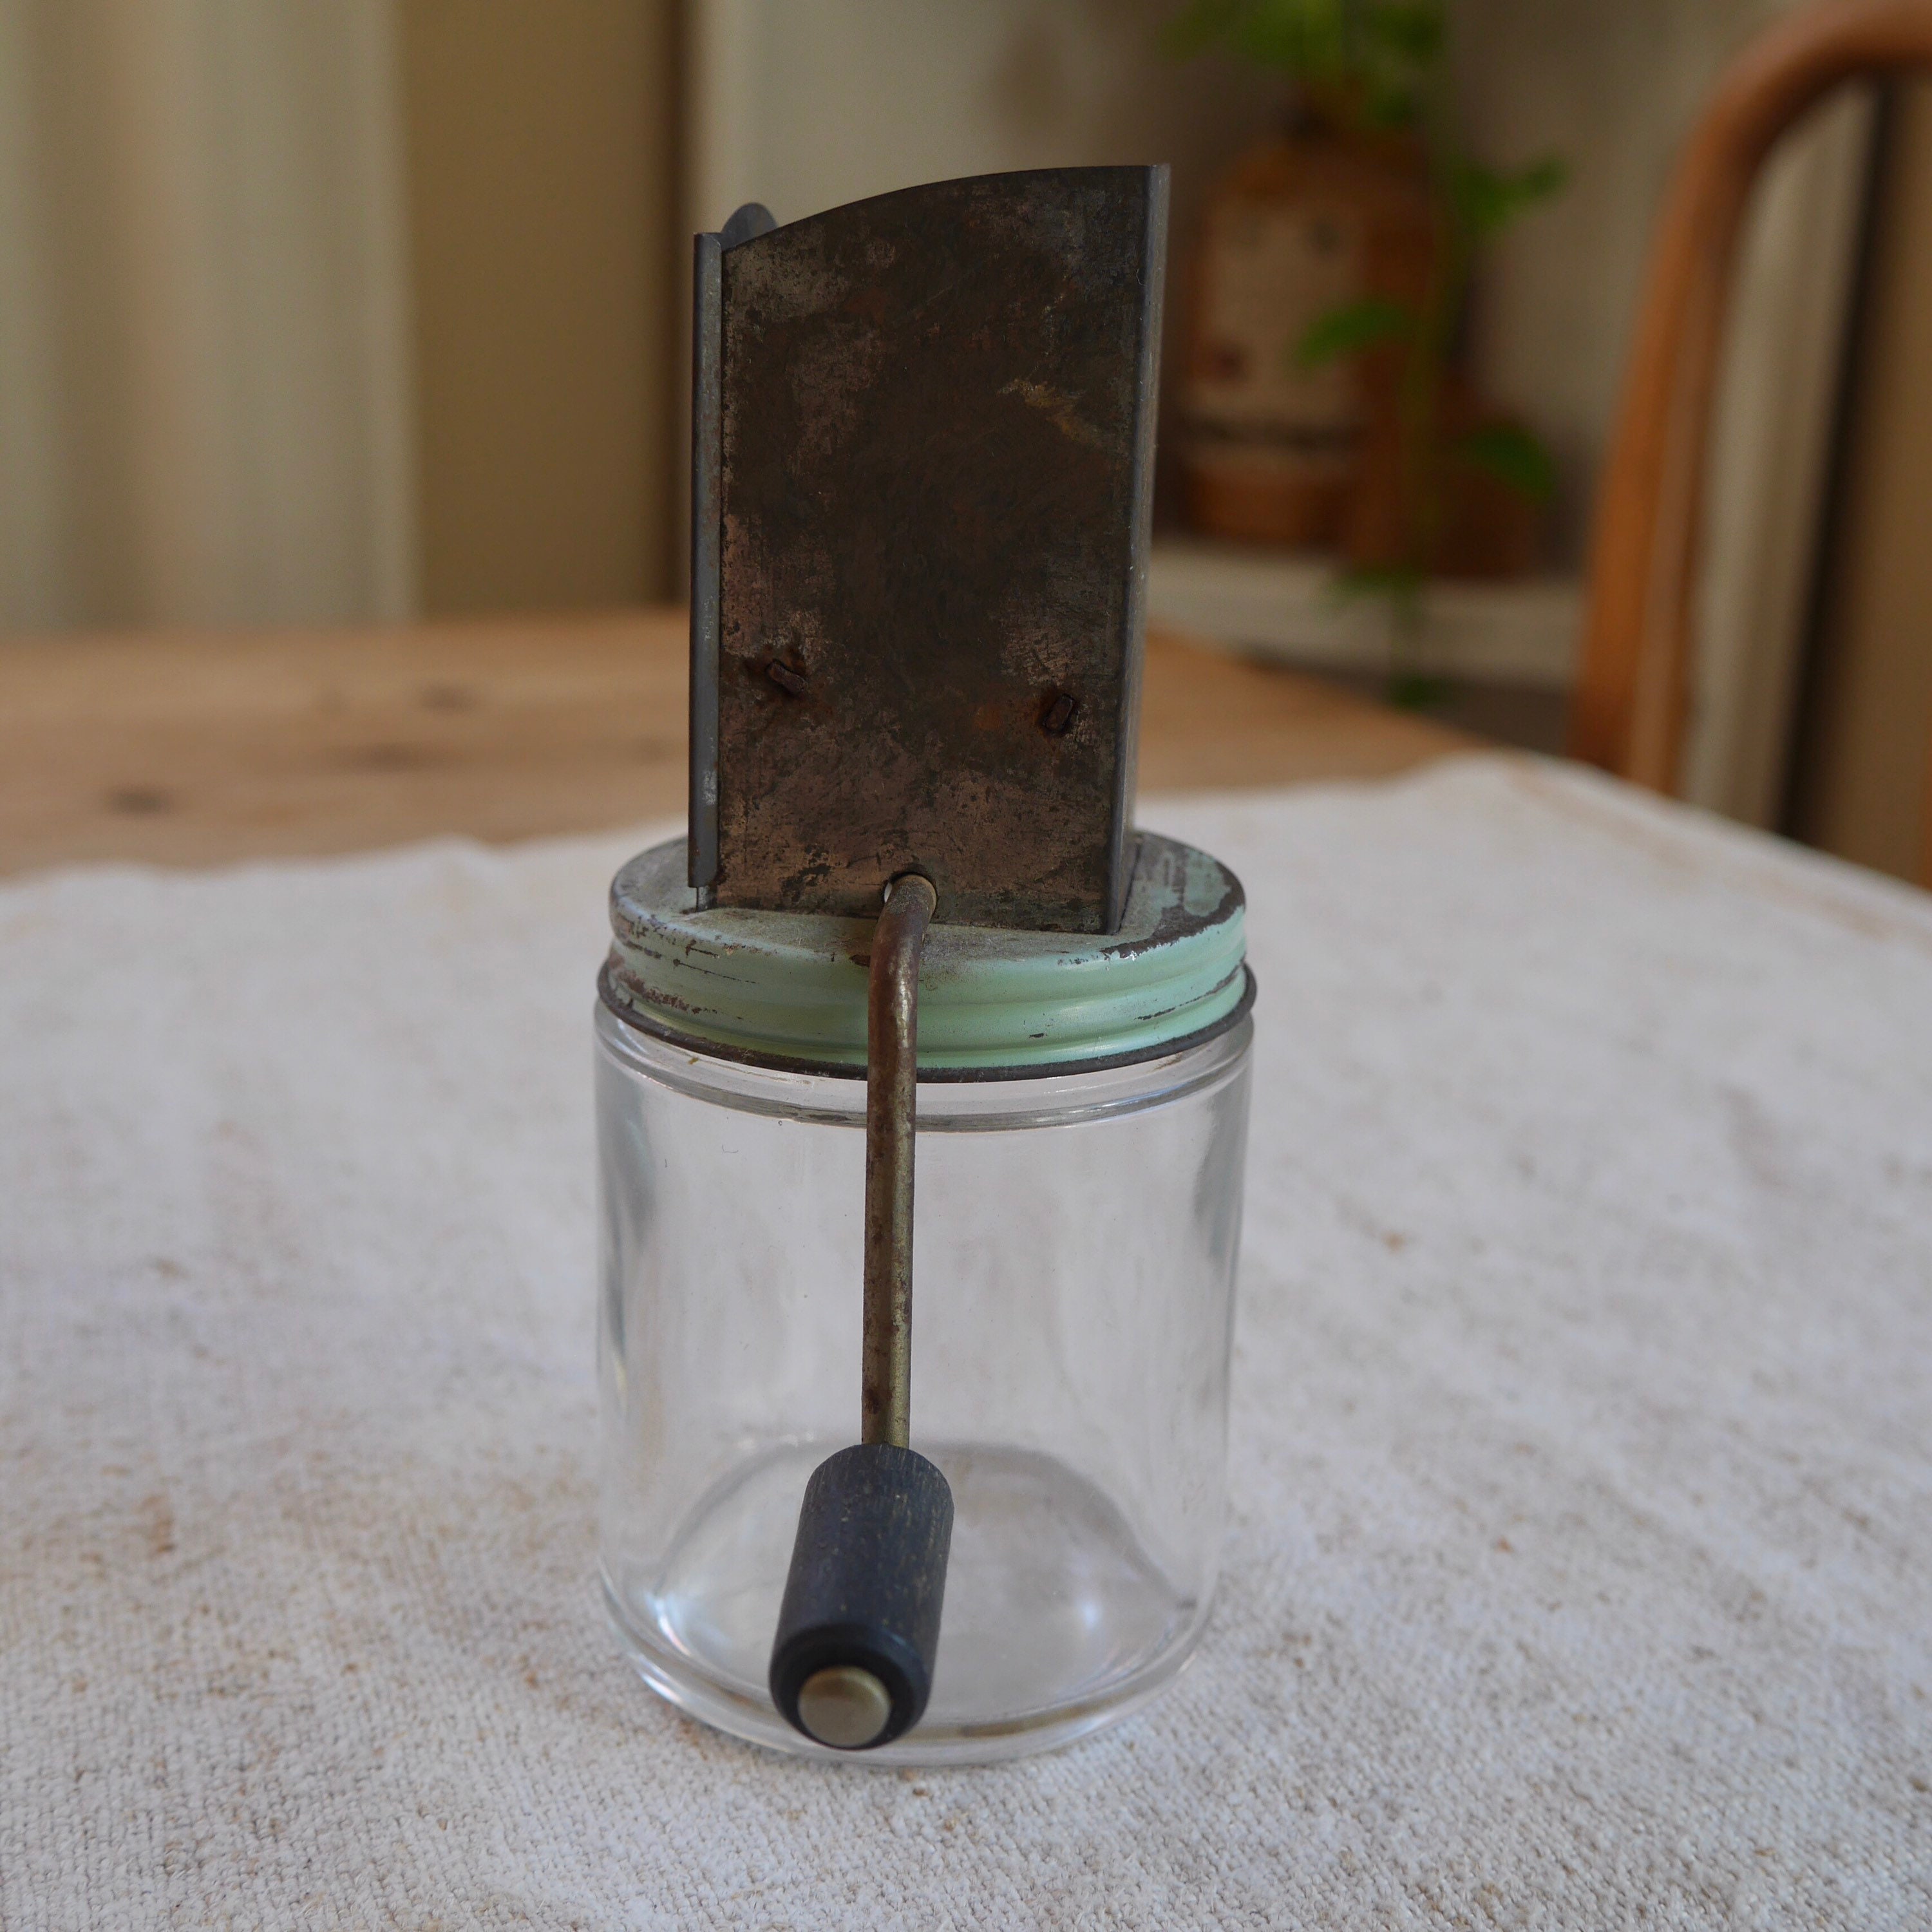 Vintage Androck Nut Chopper With Rust Lid 